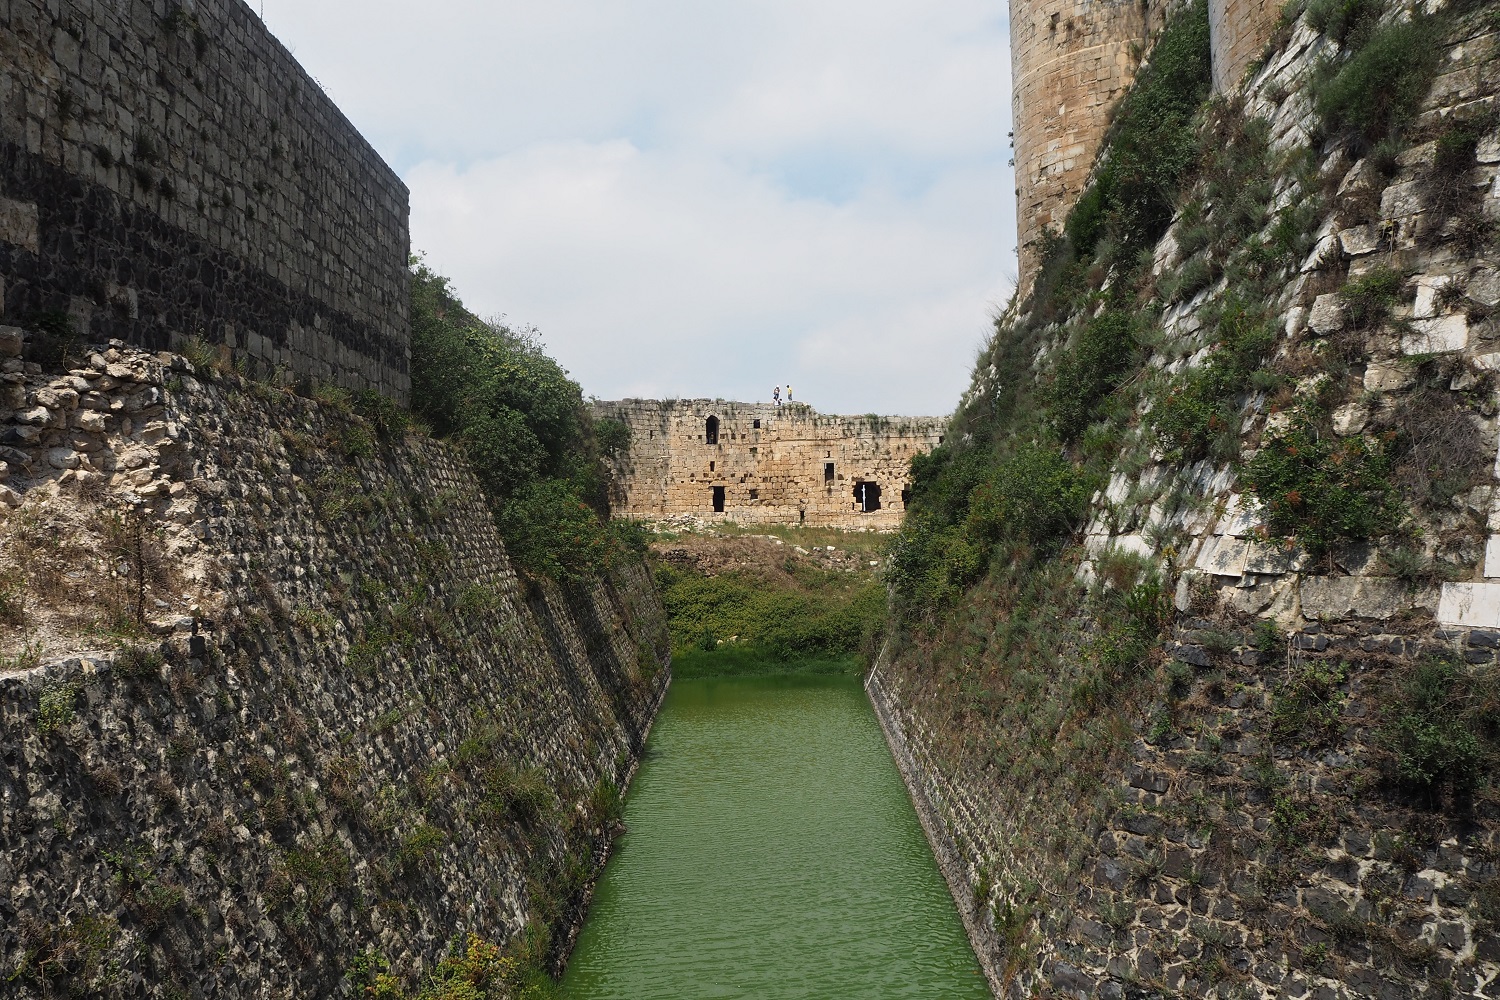 A view of the original medieval moat, which is populated by a community of water snakes (Tom Westcott/MEE)